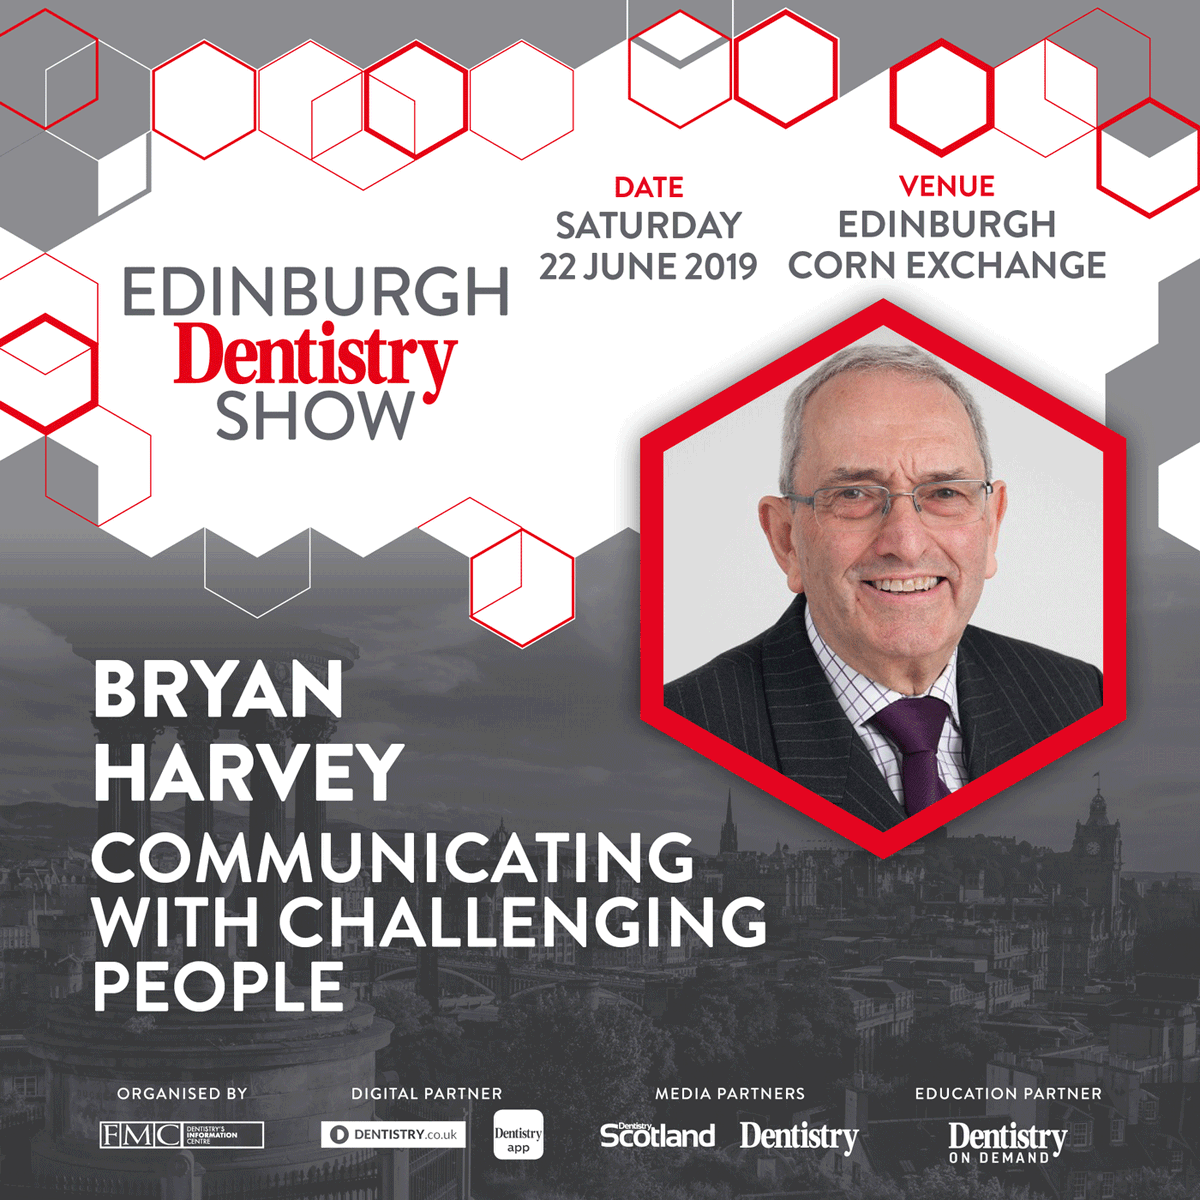 Bryan Harvey will provide insight on communicating with challenging people at the unmissable Edinburgh Dentistry Show on 22 June! Get your free ticket now! 
👉 bit.ly/2EqMNLP 👈  

#edinburghdentistryshow #dentist #dentistry #dentistrylife #dentistedinburgh